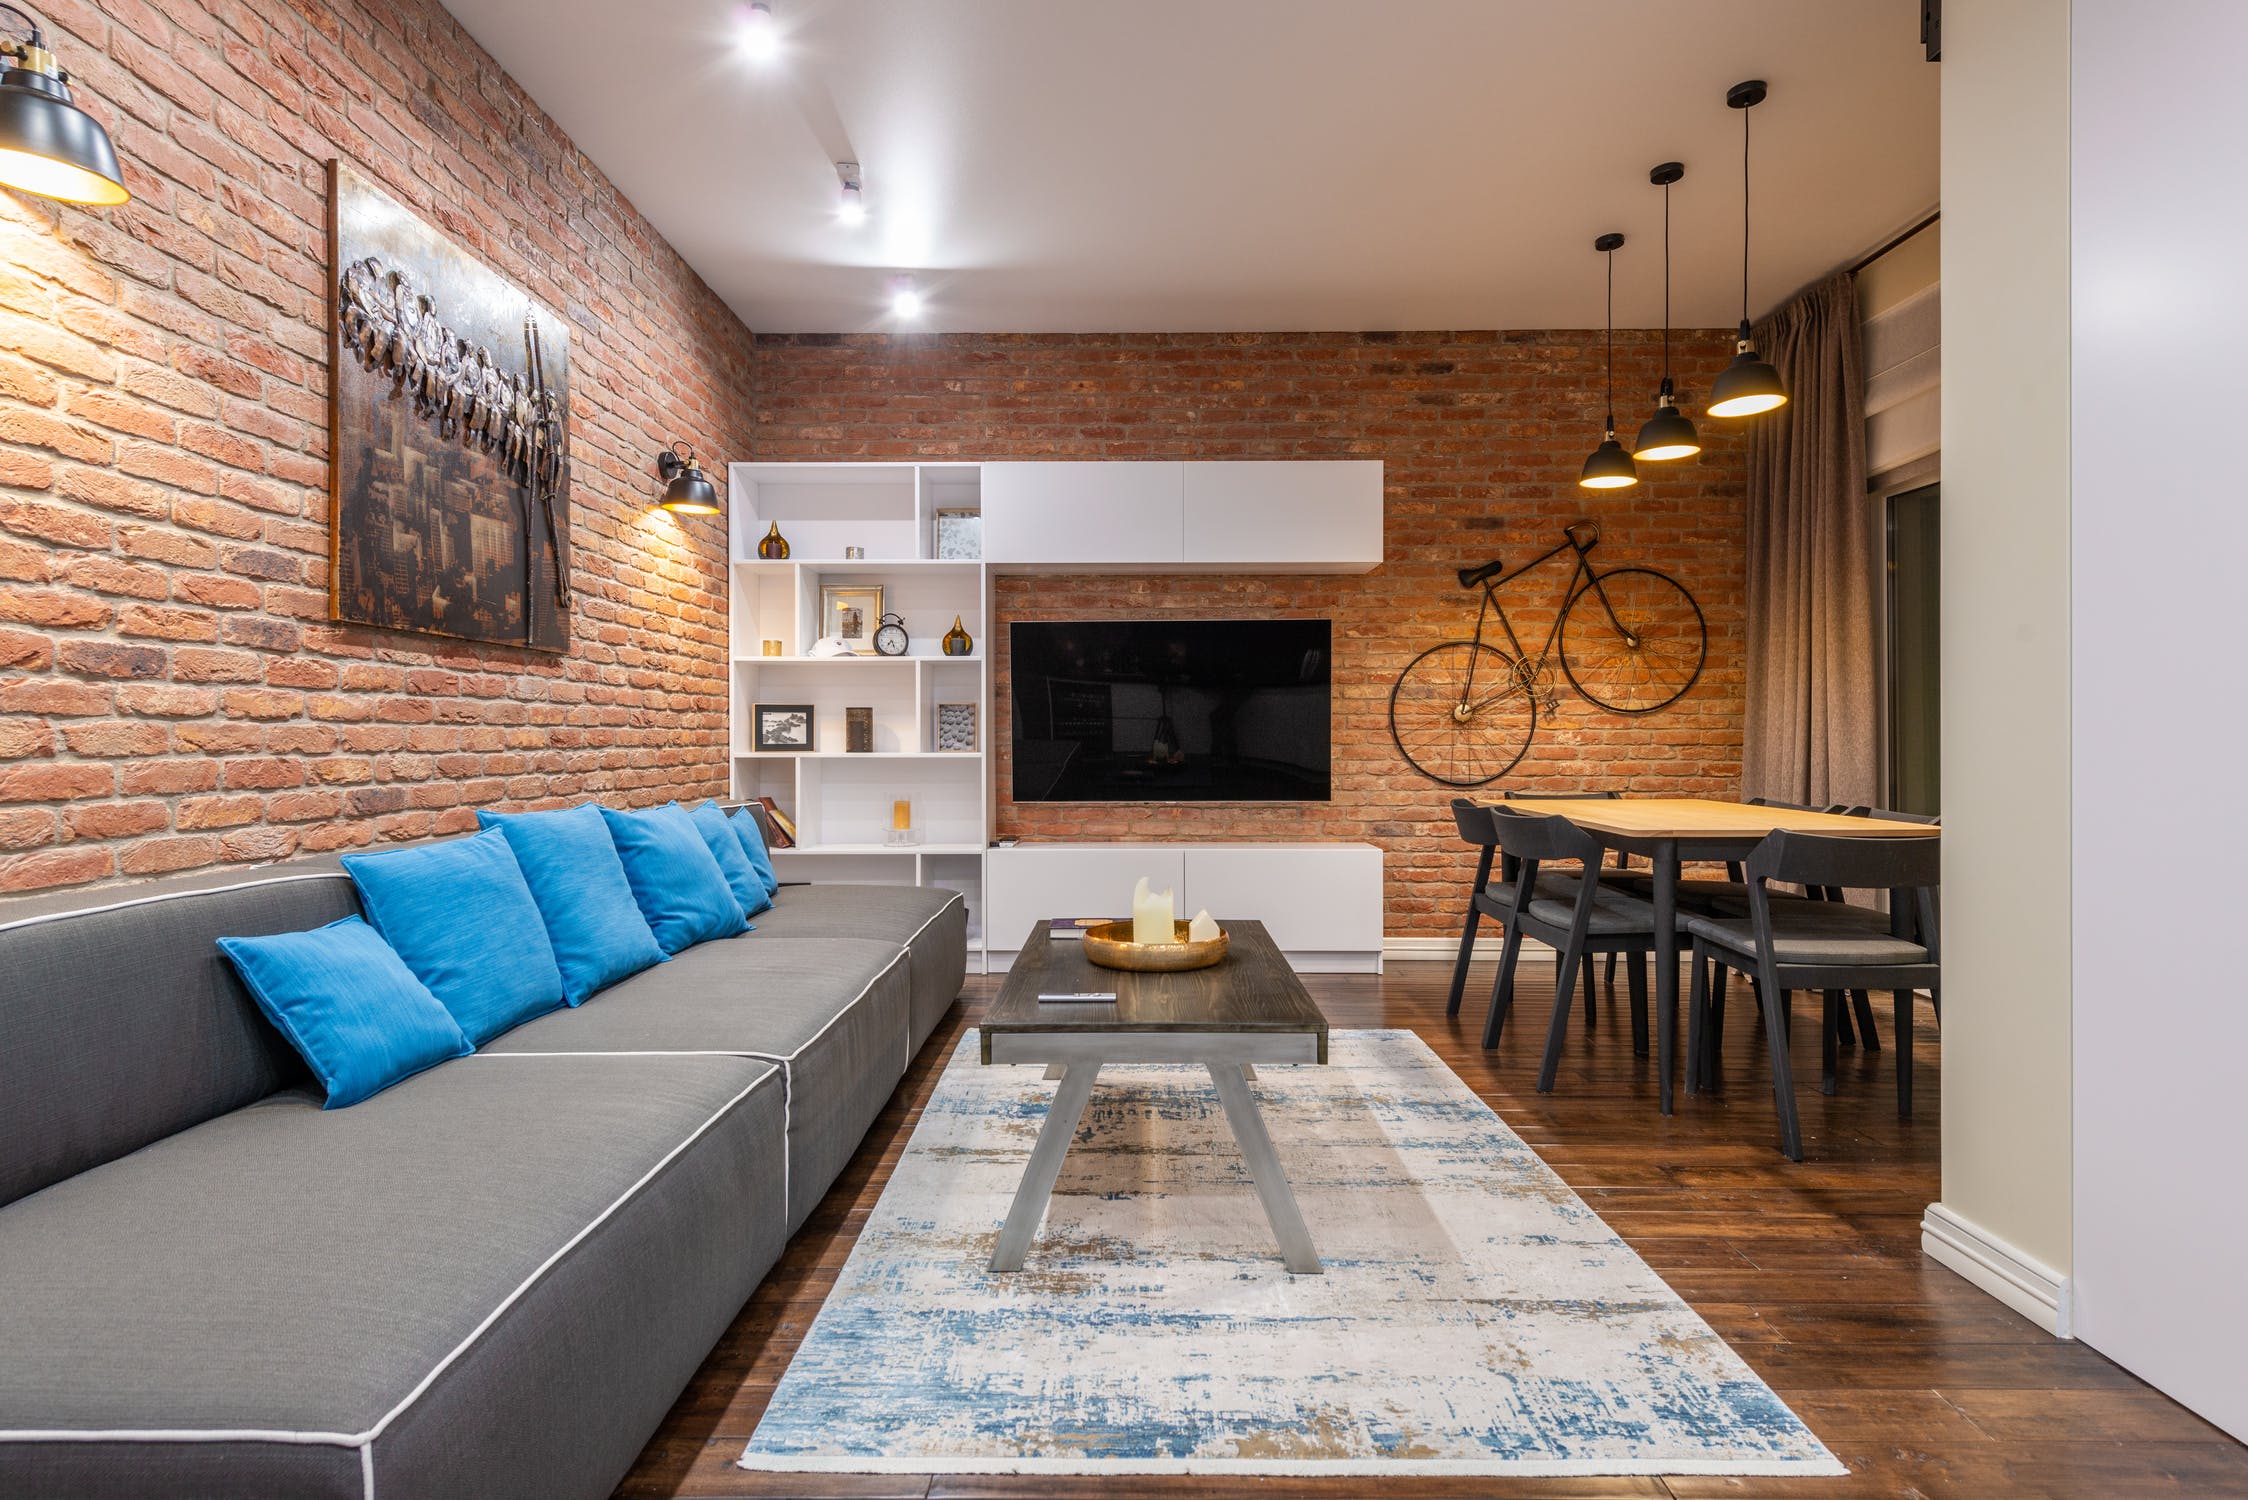 Do you know basements renovations bring lots of living space?